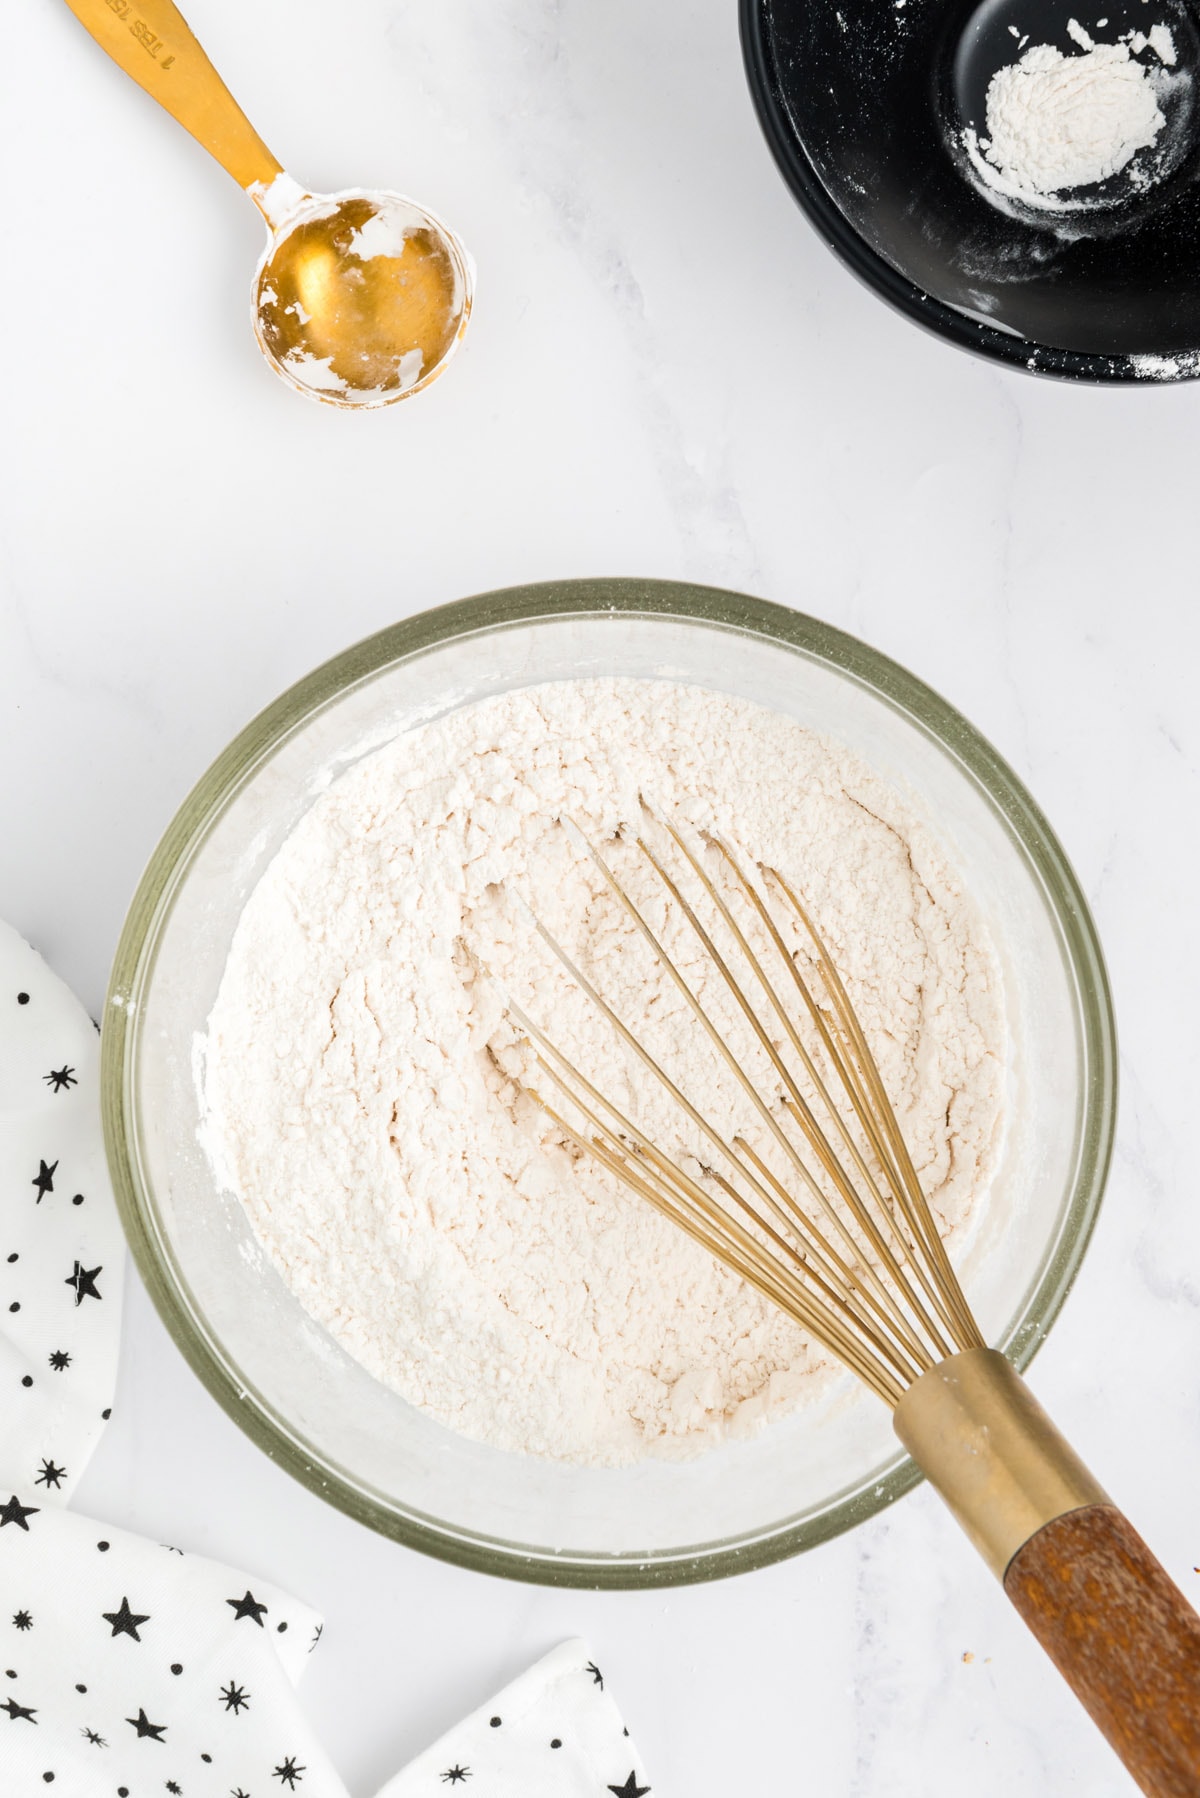 whisk together the flour and cornstarch